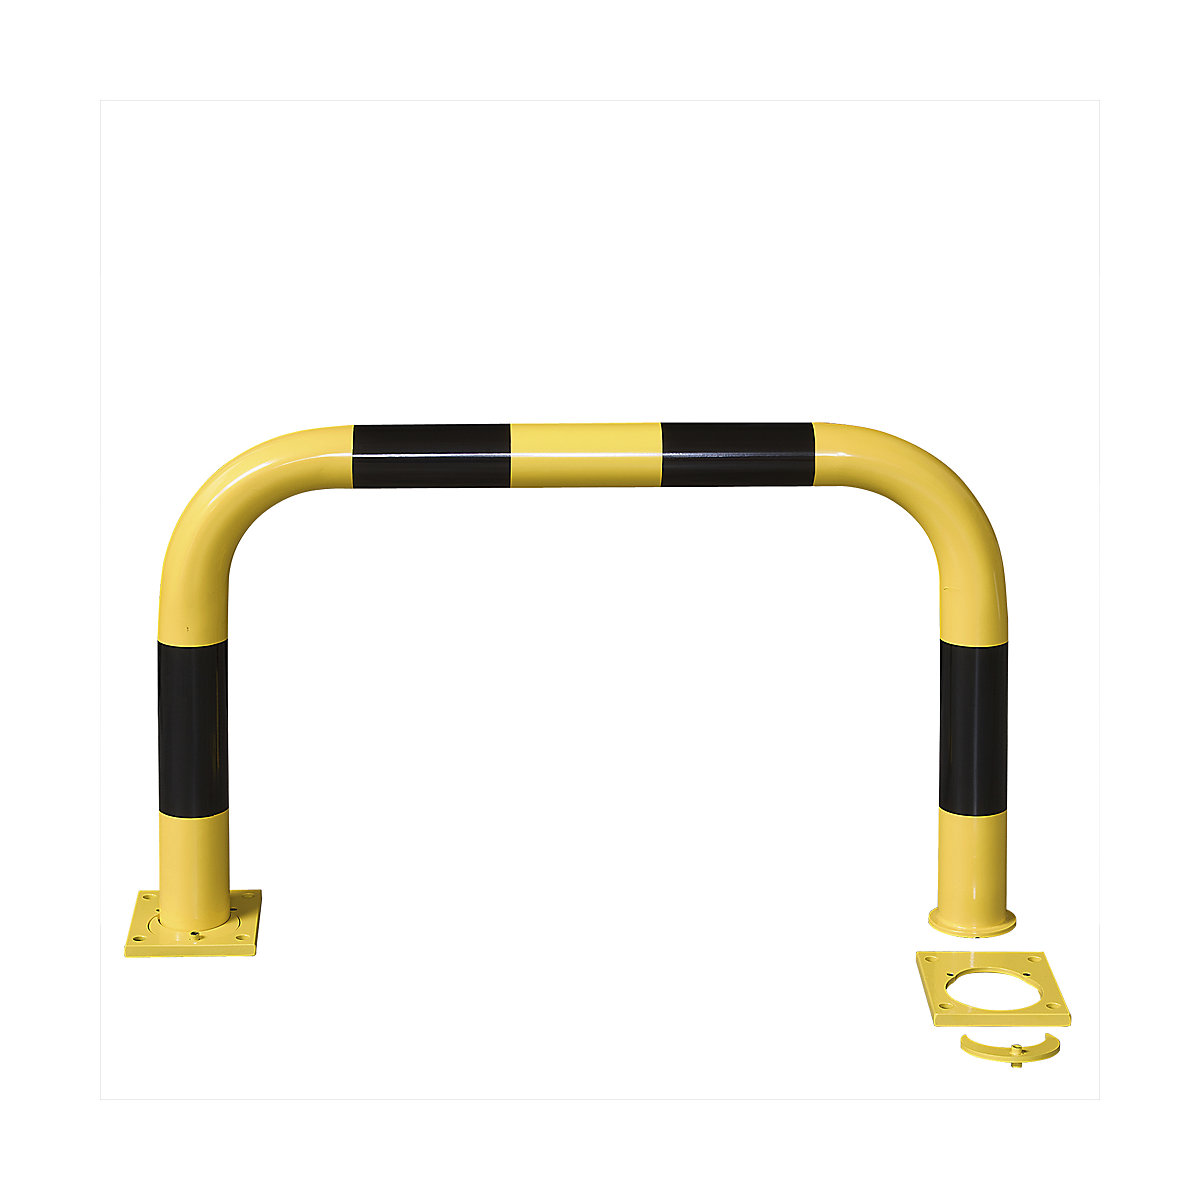 Crash protection bar, removable, black / yellow, HxW 600 x 1000 mm-3